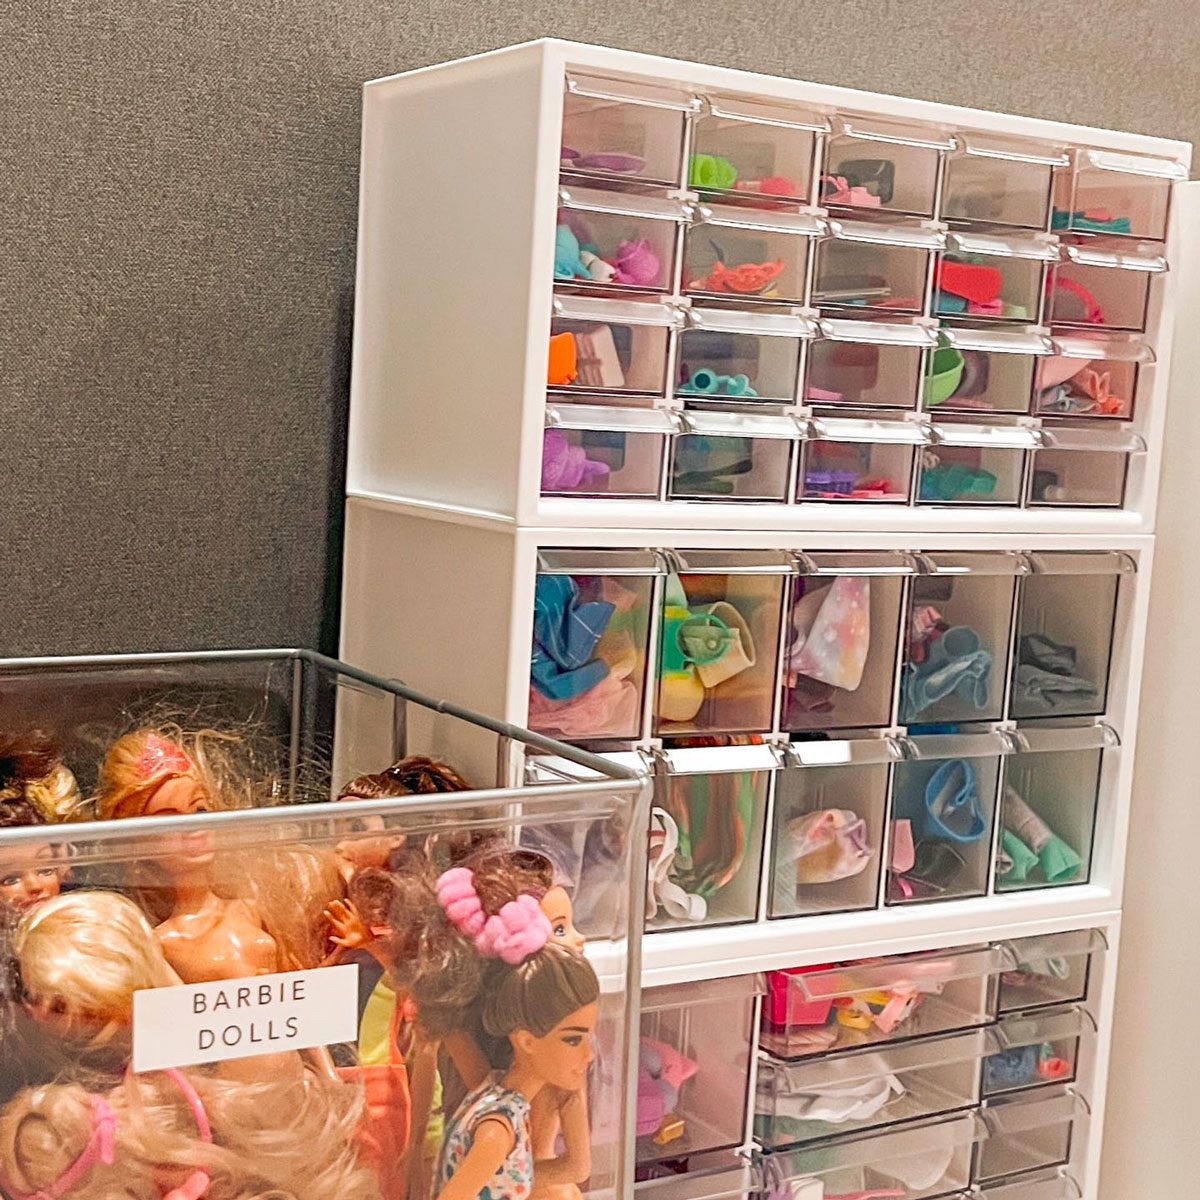 No Room for My Reborns! 8 Storage Ideas for Limited Space